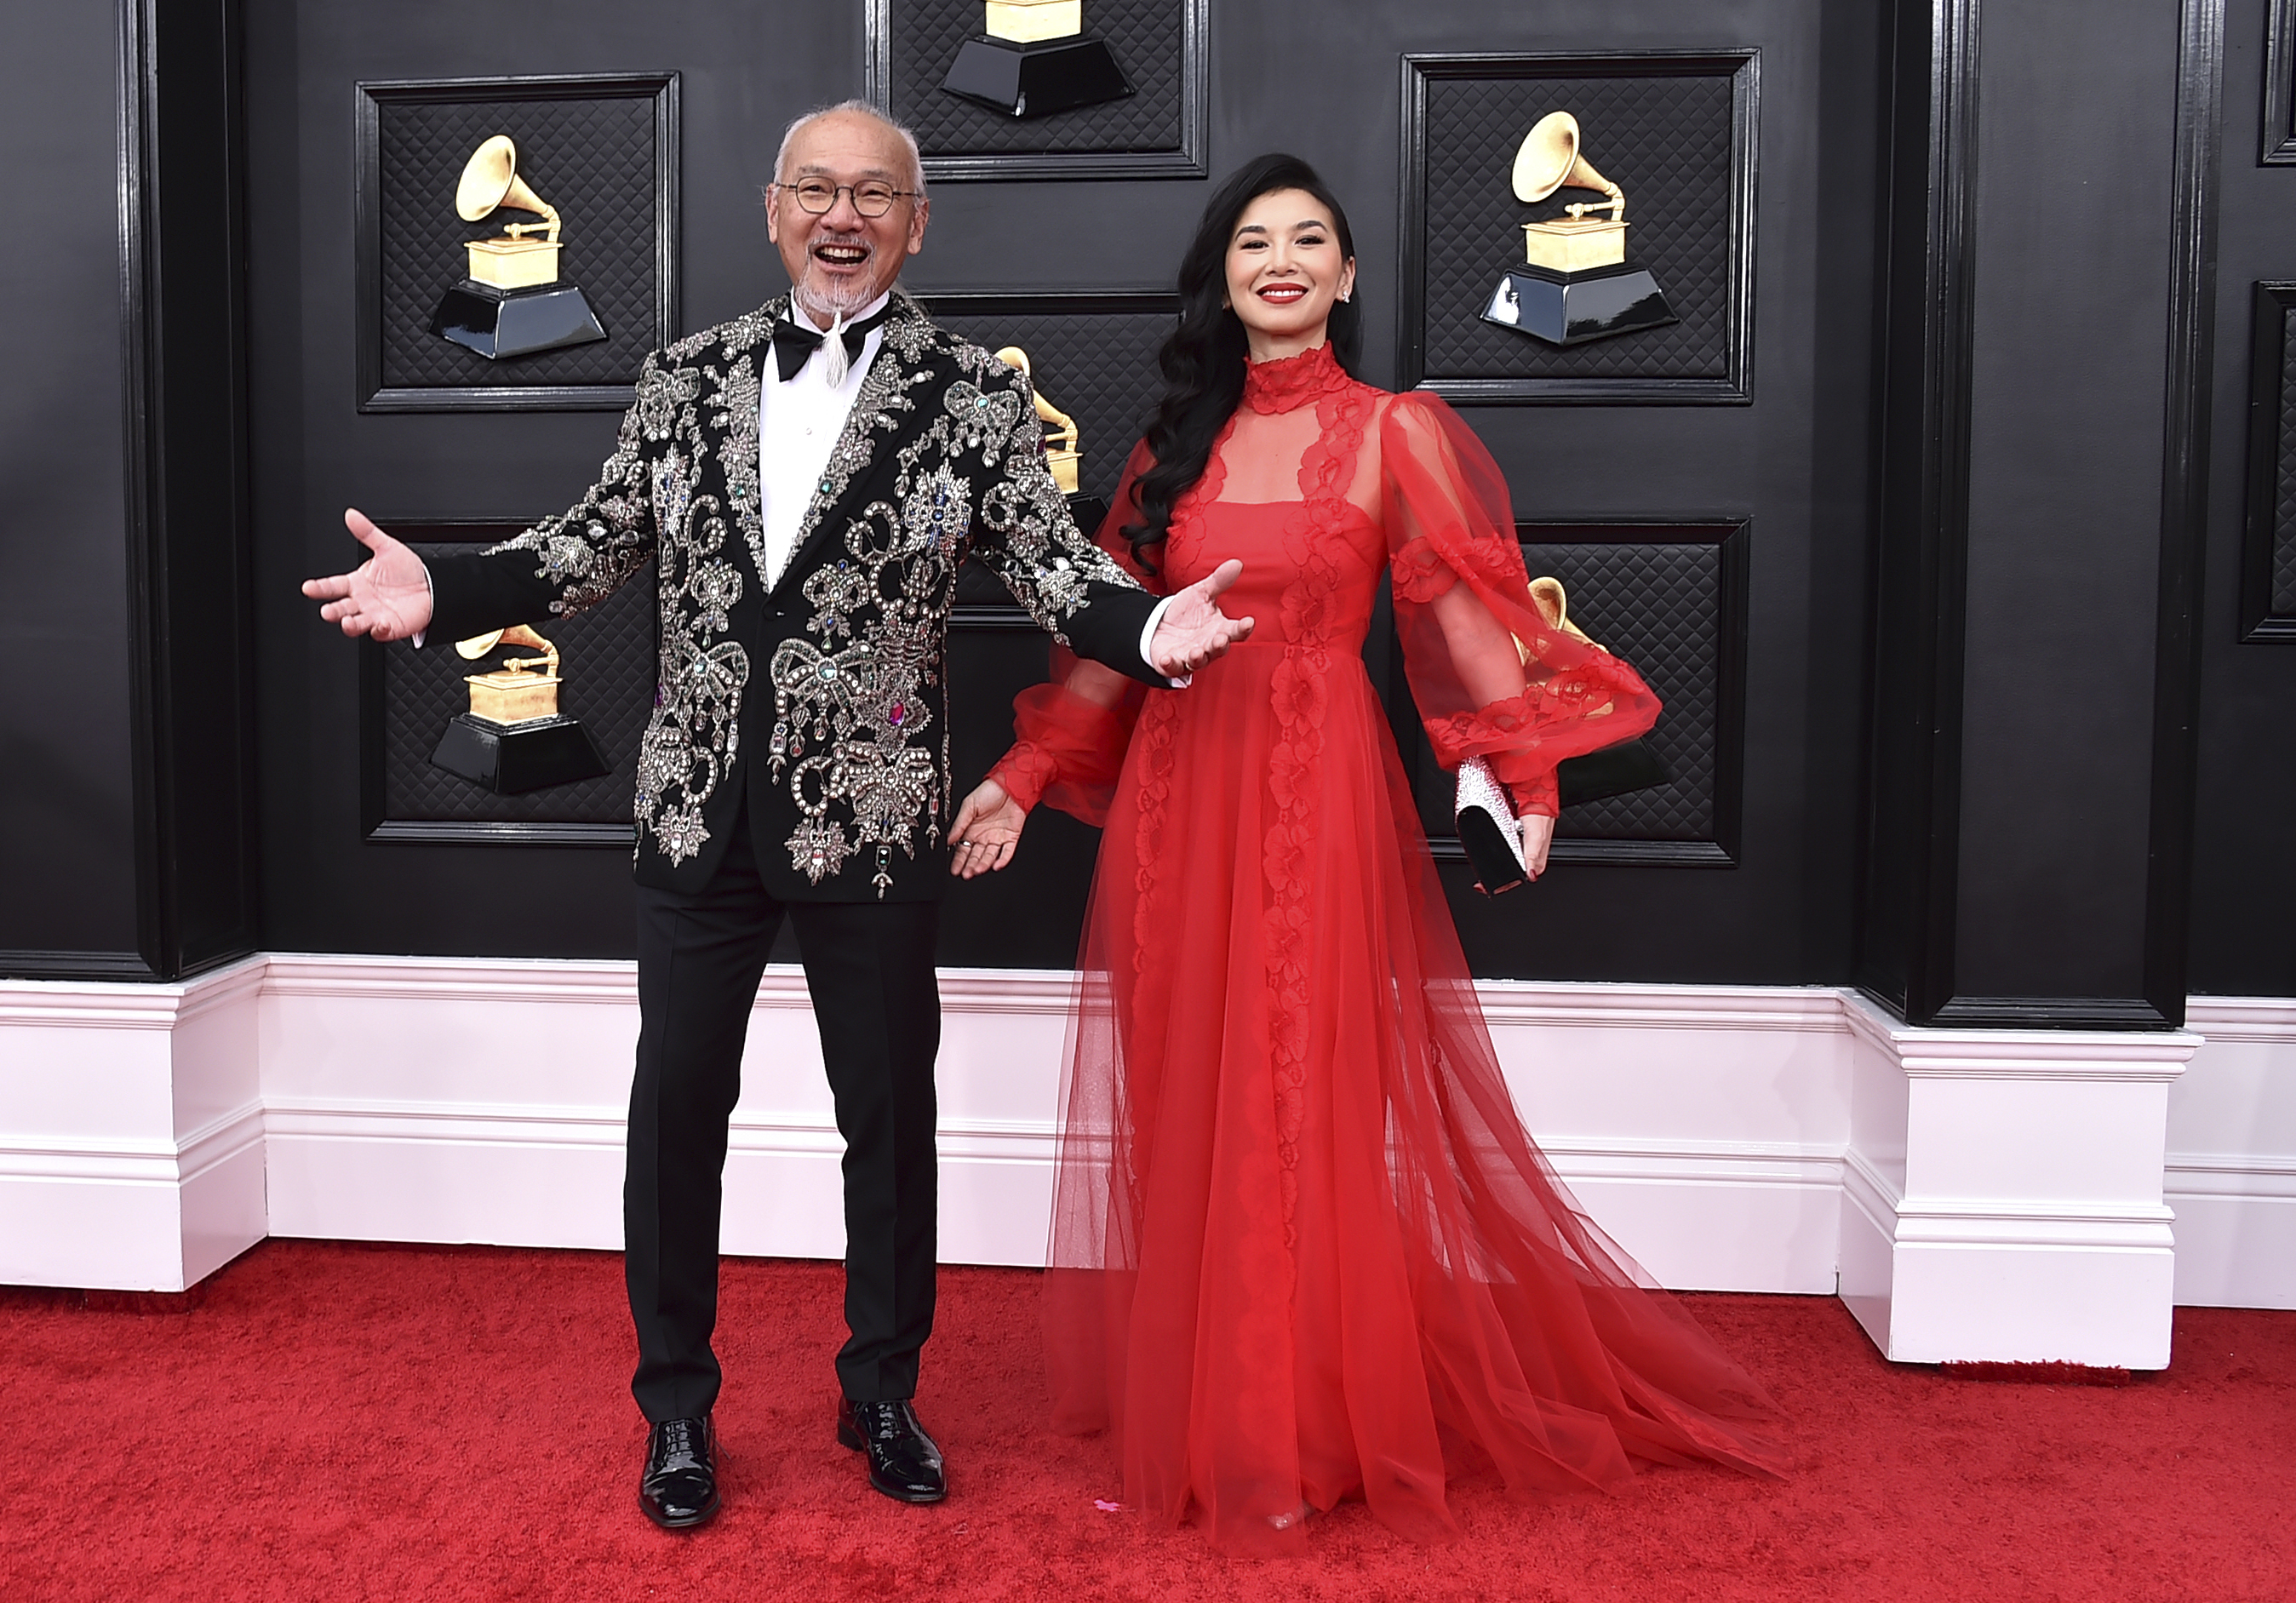 BTS Wears Coordinating Suits at Grammy Awards Red Carpet 2022